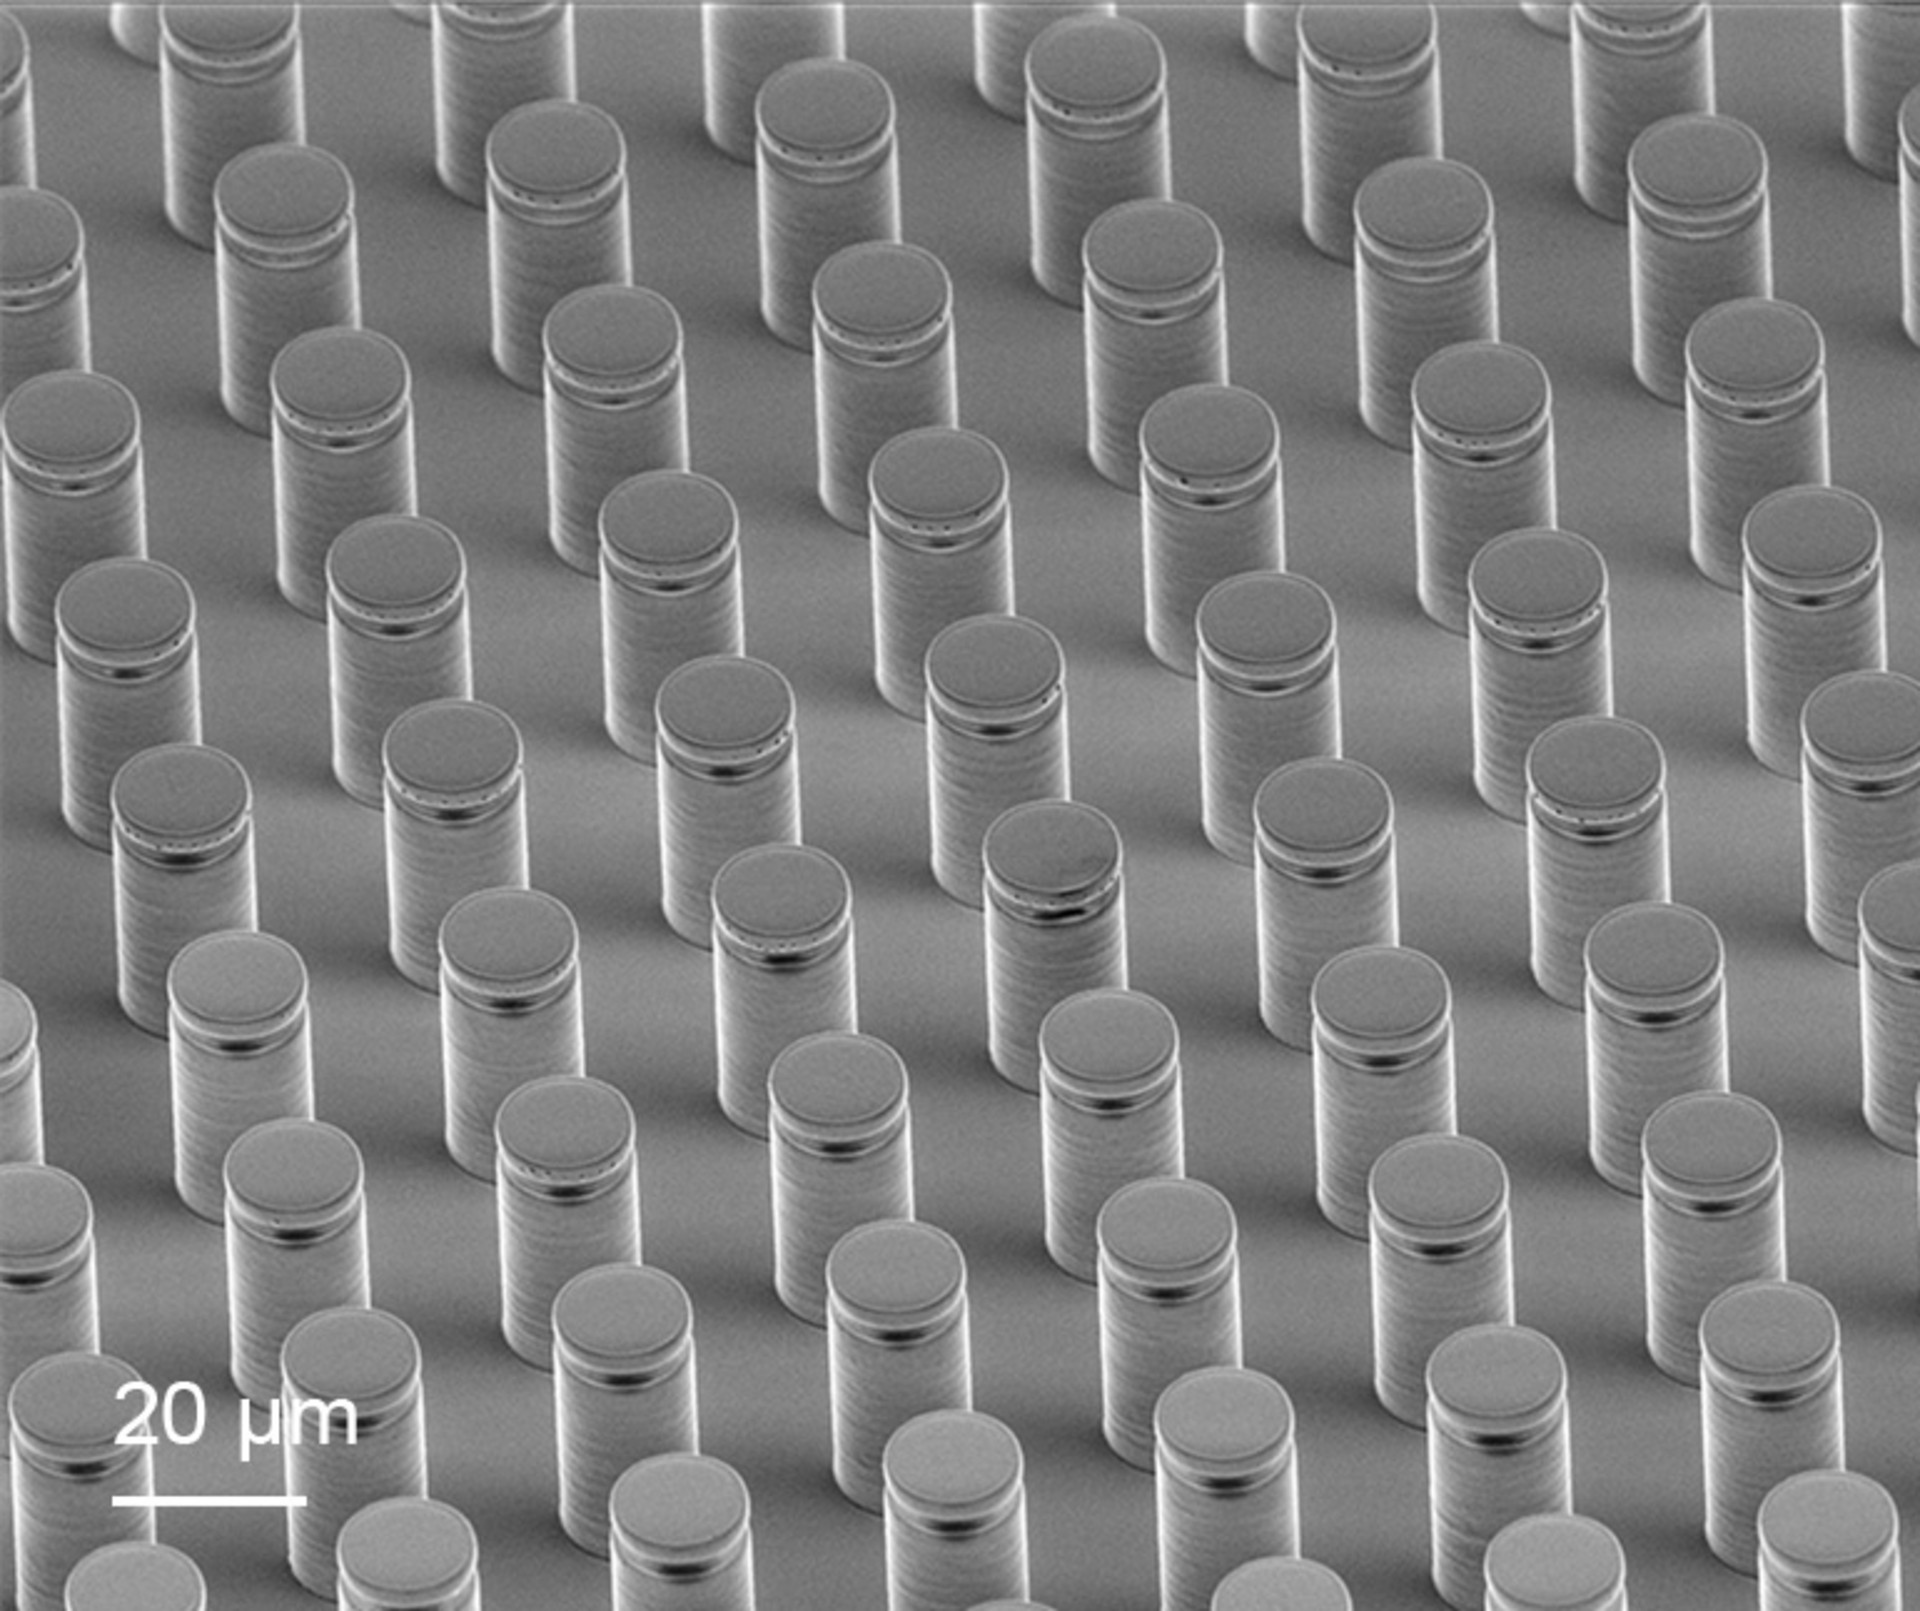 Array of bioinspired adhesive microstructures fabricated by replica molding from a 3D-printed master